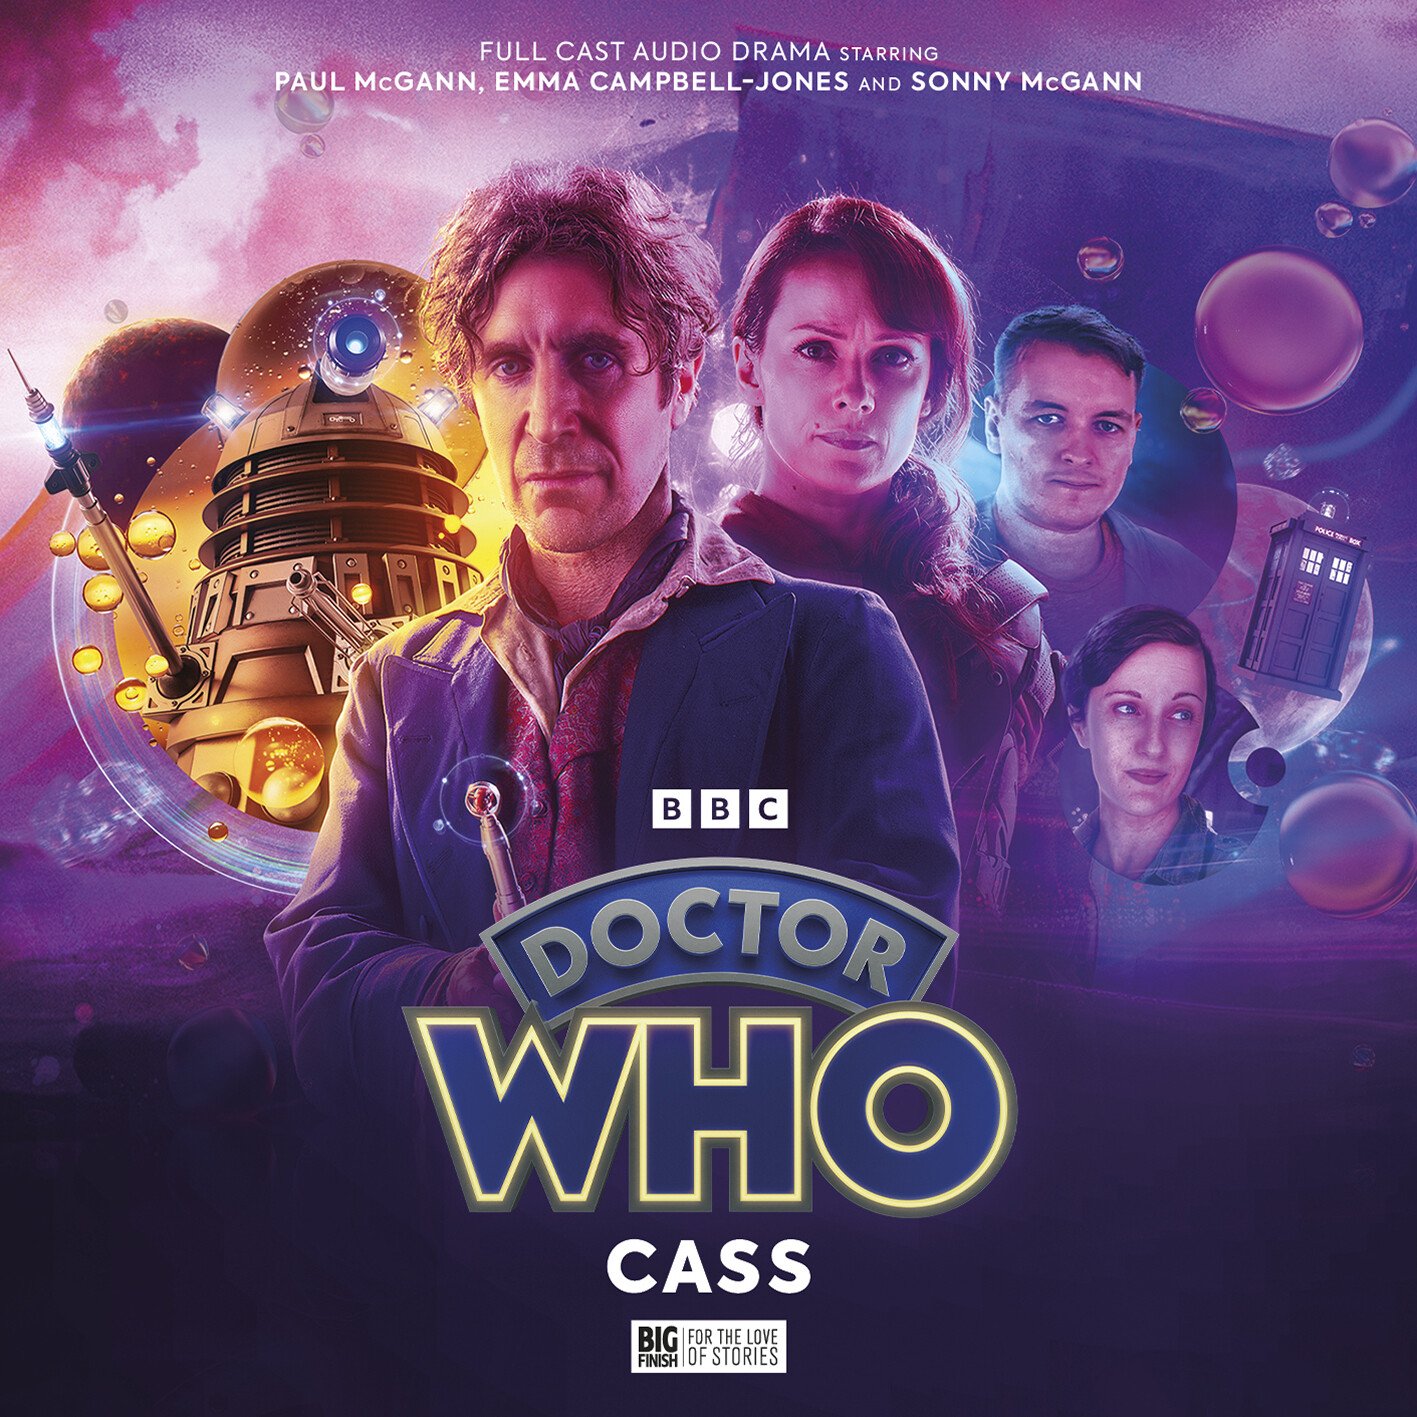 Out Now: The Eighth Doctor Returns to the Time War With New Companion…  Cass?! – The Doctor Who Companion